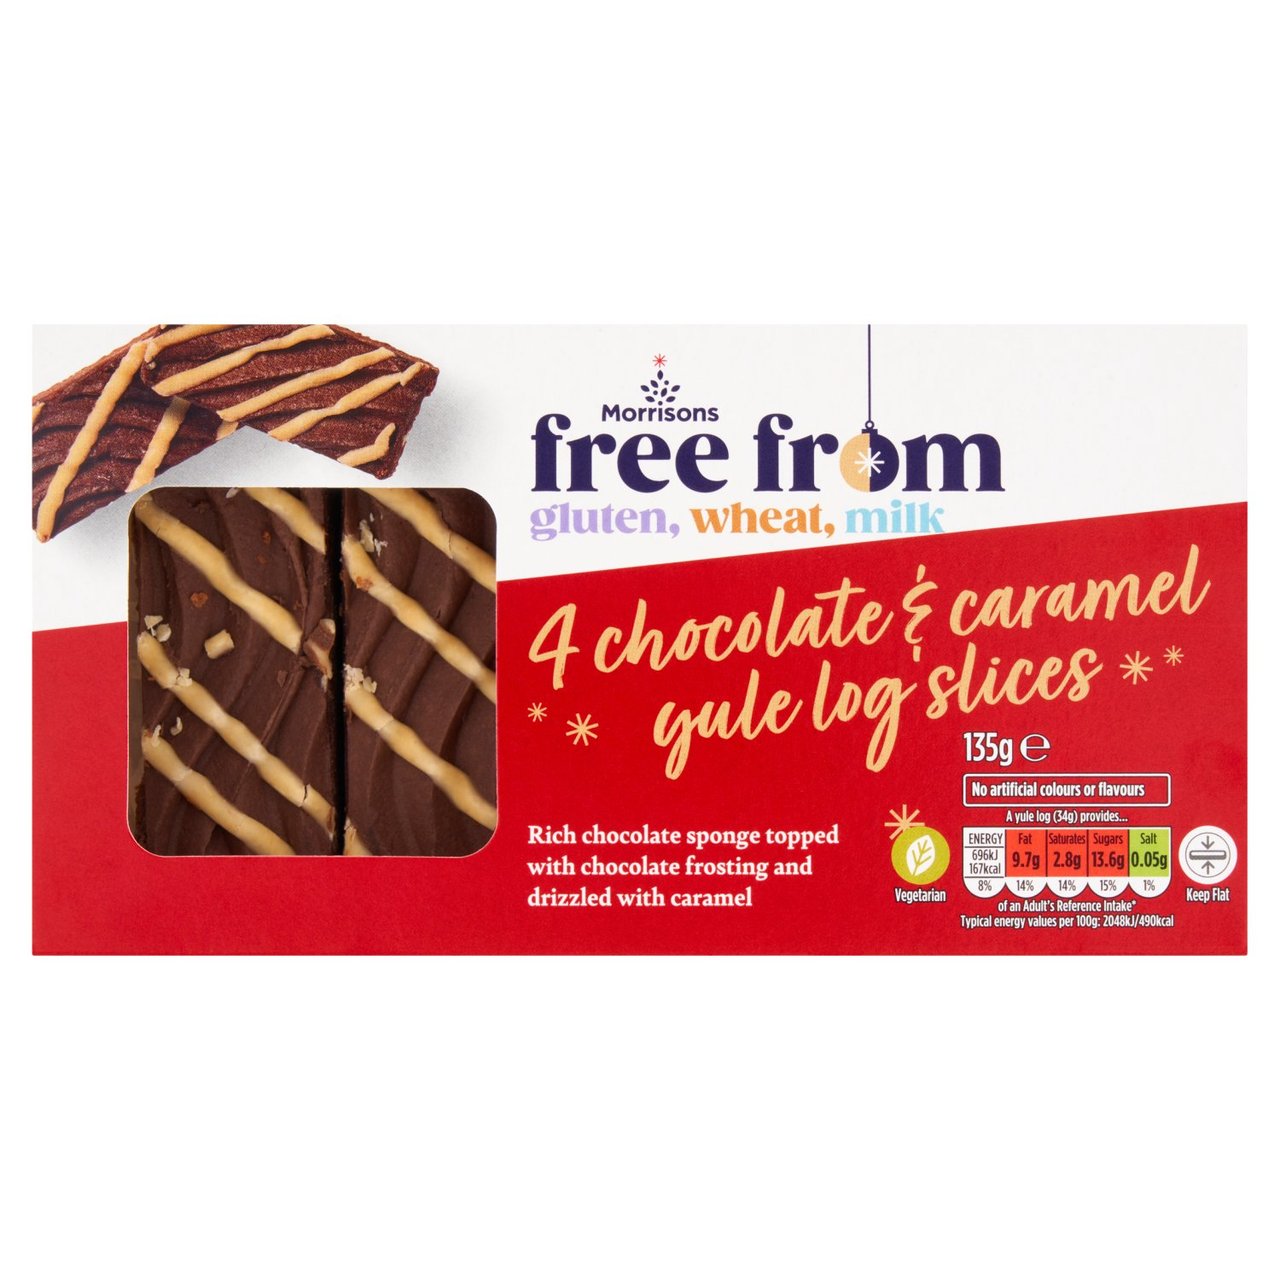 Morrisons gluten-free Christmas products 2023: 4 chocolate and caramel yule log slices